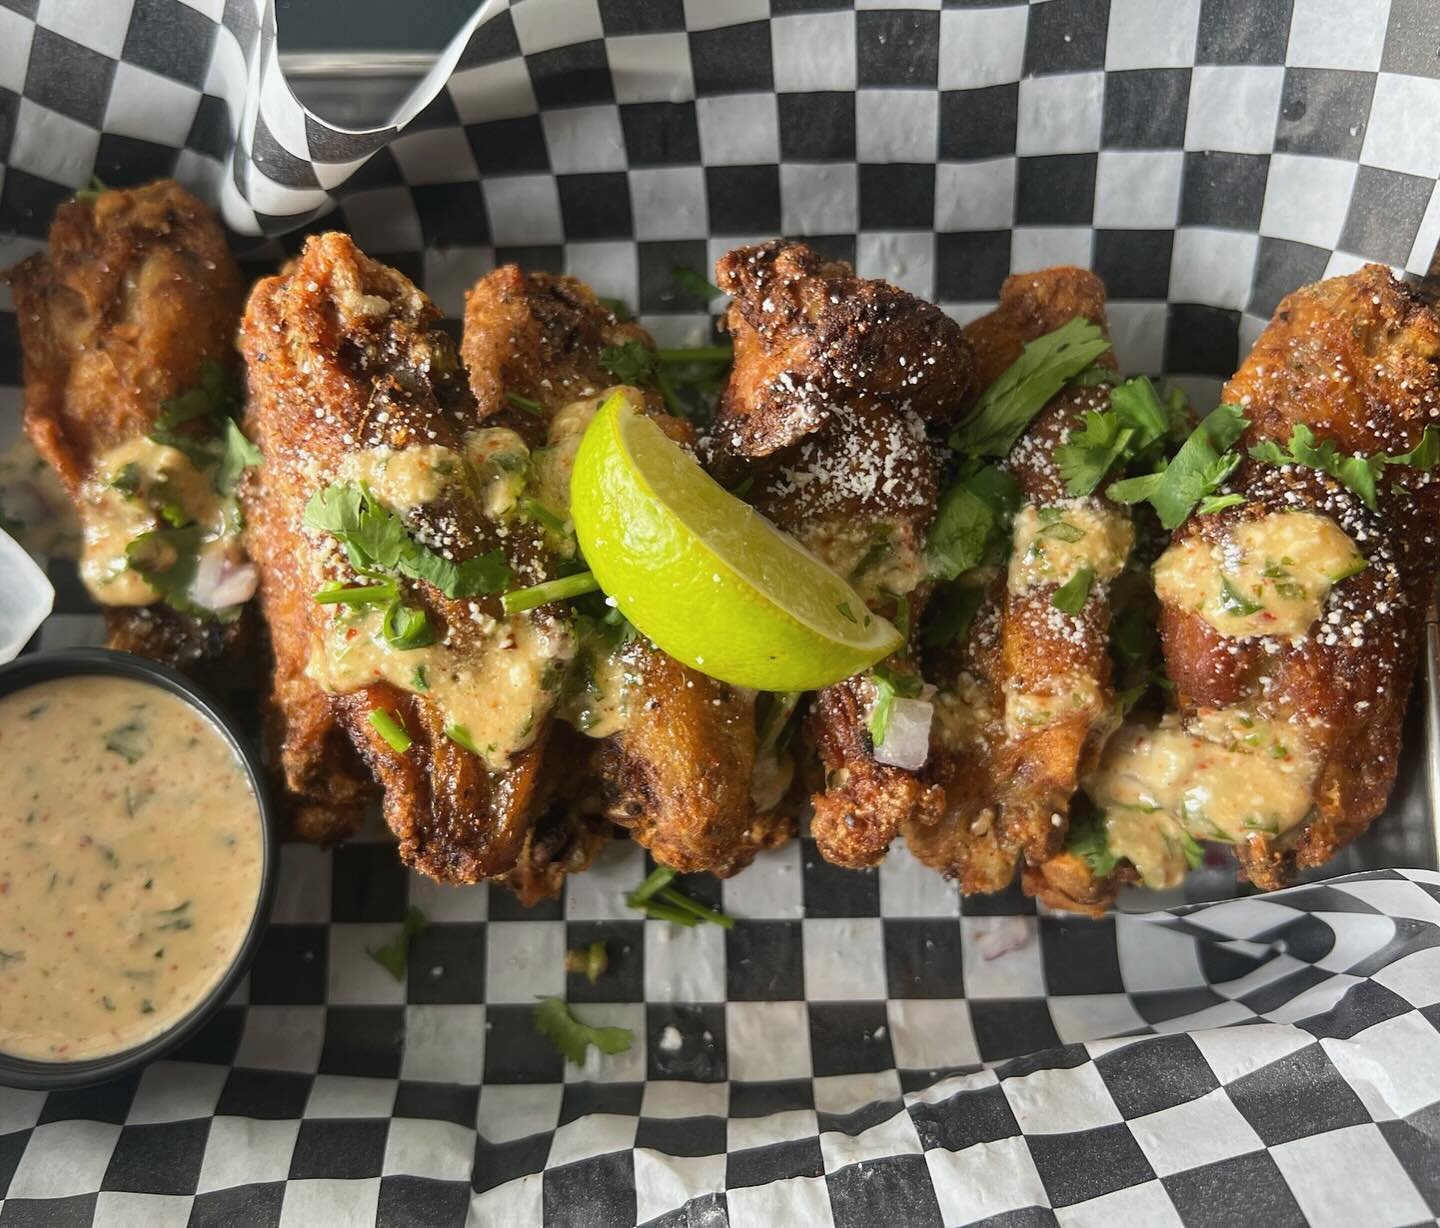 New Month, New Wing Flavor! Available now until the end of May!  ELOTE WINGS: Tajin and Cotija dry rubbed wings served with house made Elote sauce for dipping, topped with cilantro &amp; lime.🍗🍋&zwj;🟩🌽🇲🇽

$1 Wings during Happy Hour EVERY Wednes